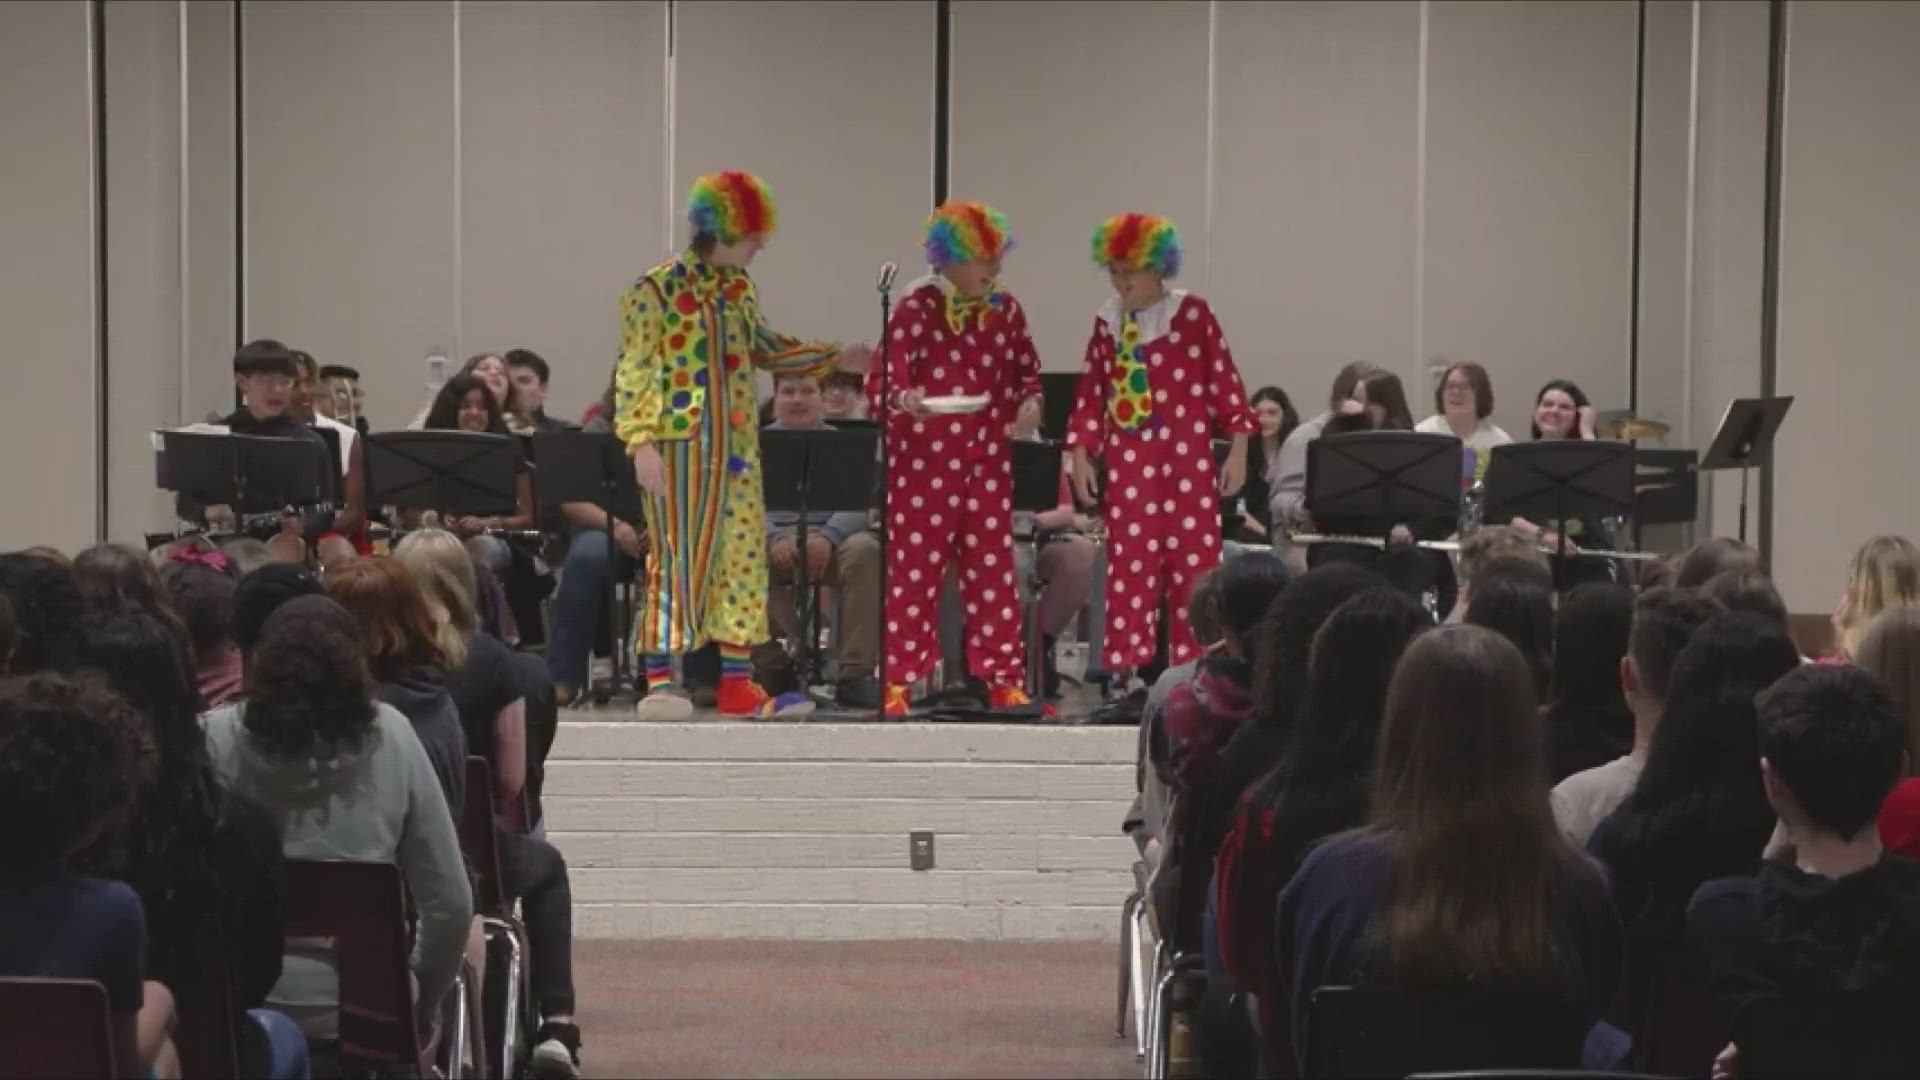 Clarksville Middle School students put on a talent show featuring everything from singing to comedic clowns.